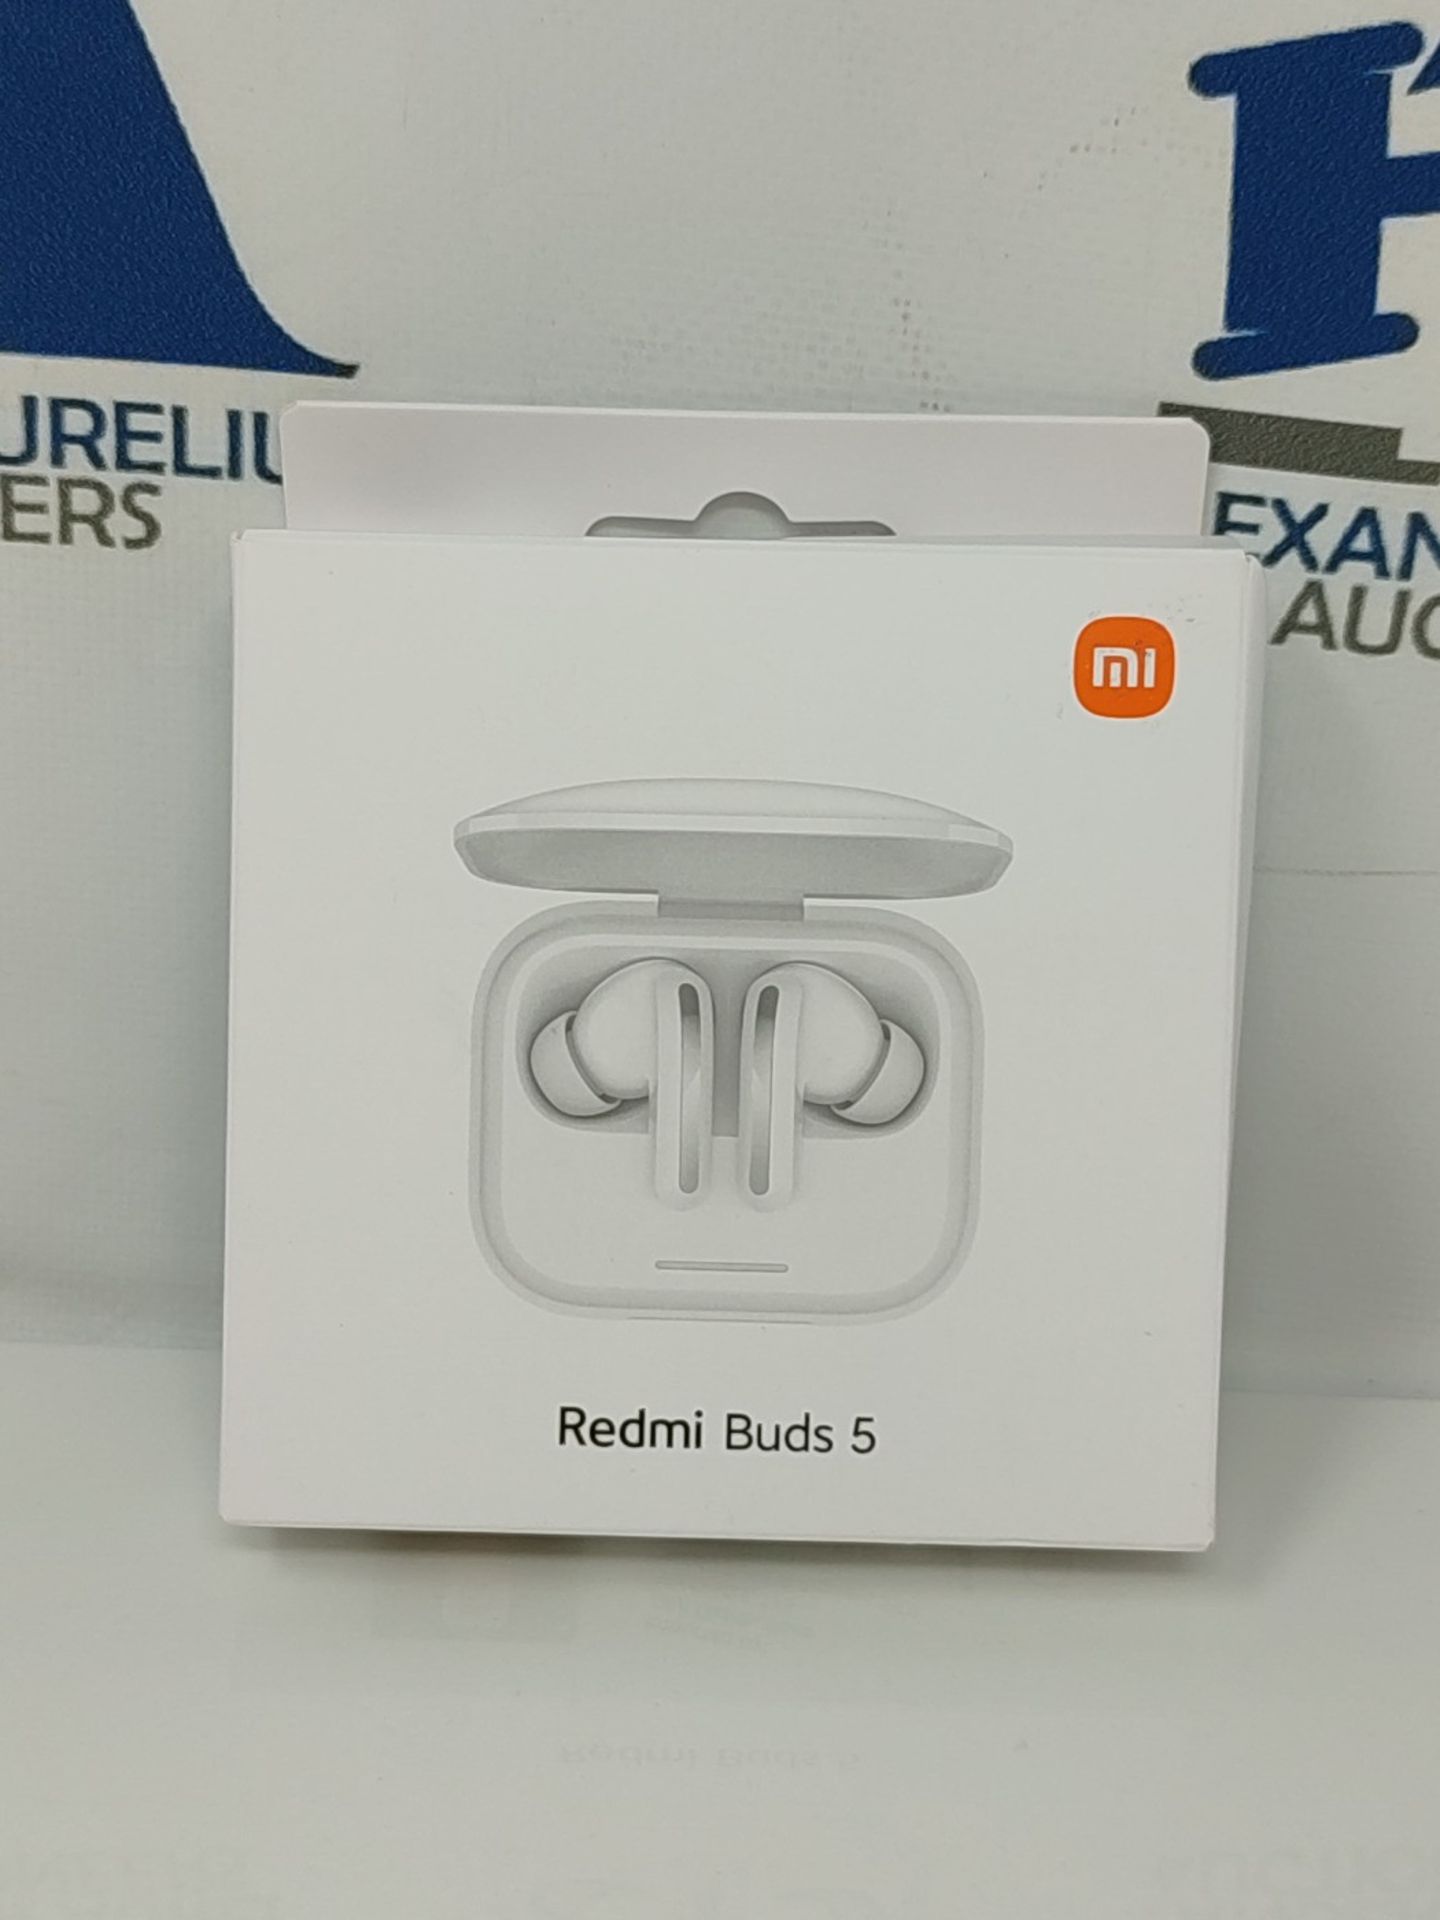 Xiaomi Redmi Buds 5, Bluetooth Earphones, 12.4mm dynamic driver, Active noise cancella - Image 2 of 3